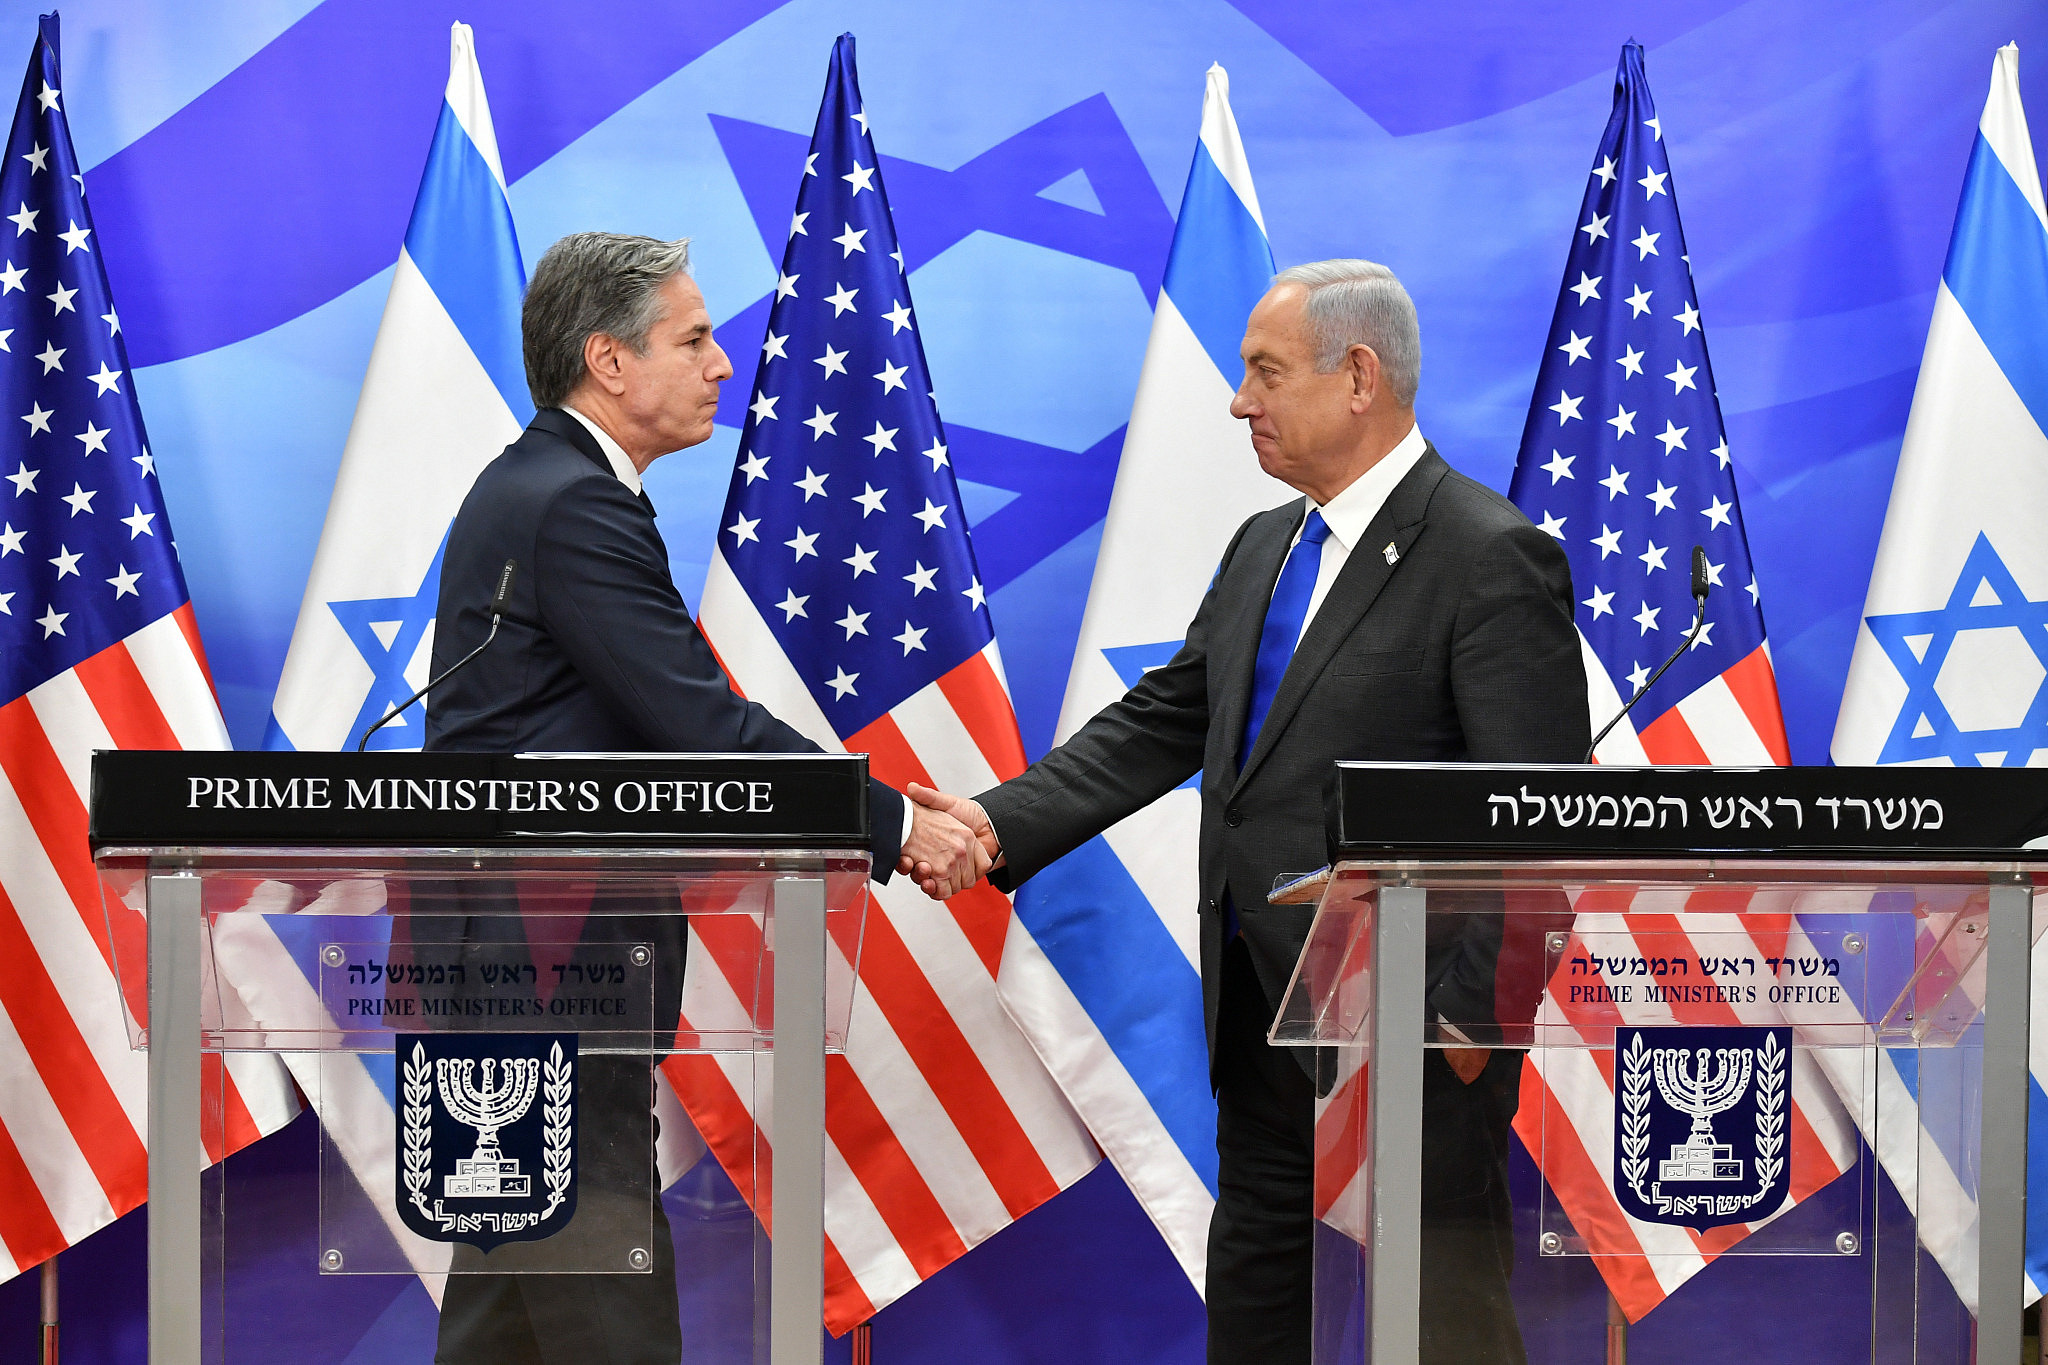 Israeli Prime Minister Benjamin Netanyahu and U.S. Secretary of State Antony Blinken give a press statement after their meeting at the Prime Minister's Office in Jerusalem, January 30, 2023. (Yoav Ari Dudkevitch/POOL)